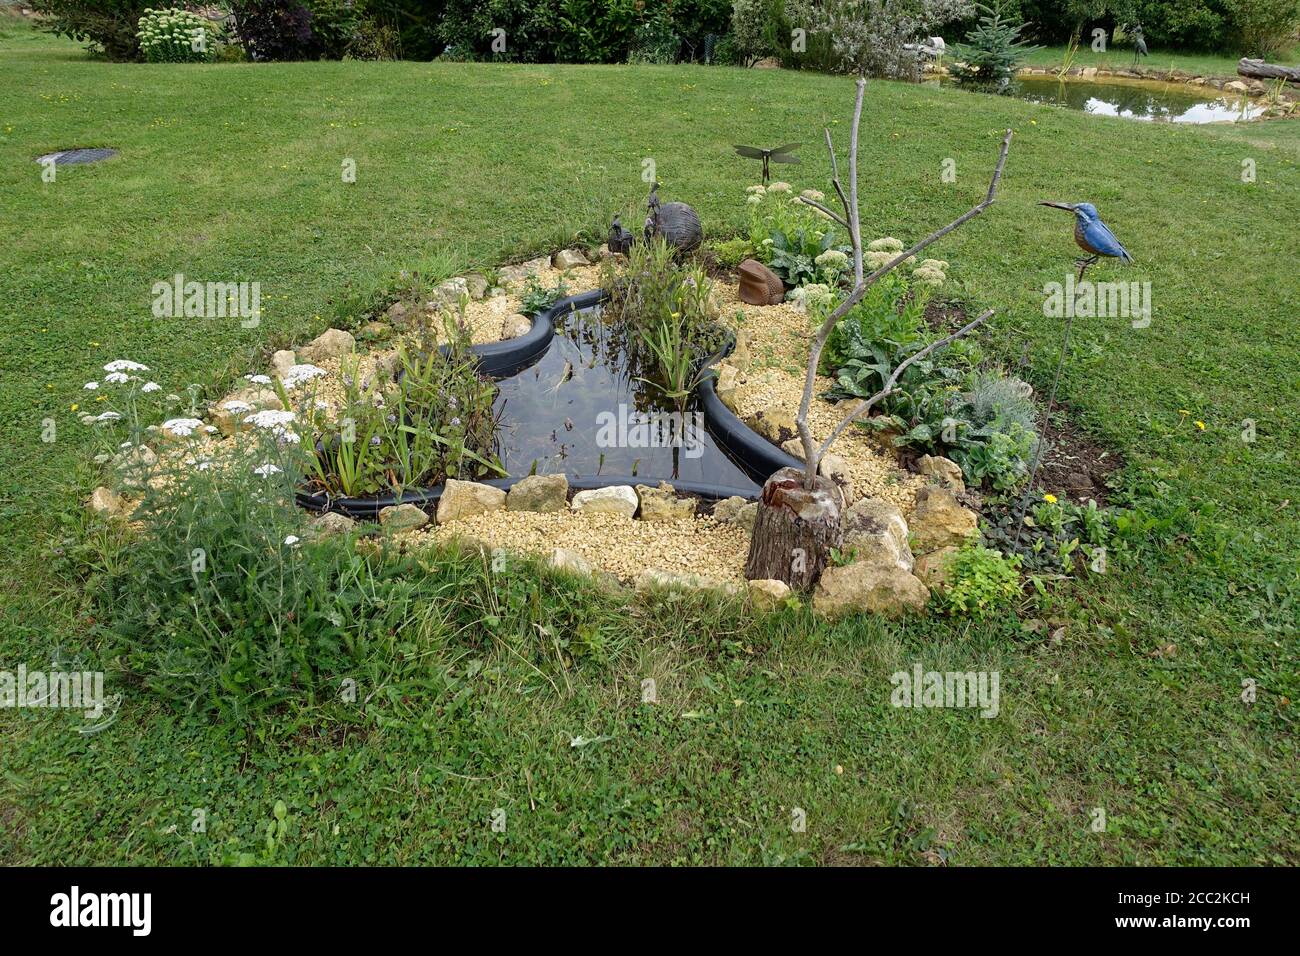 Mature small garden pond, made with rigid plastic liner, Colemans Hill Farm, Mickleton, UK Stock Photo